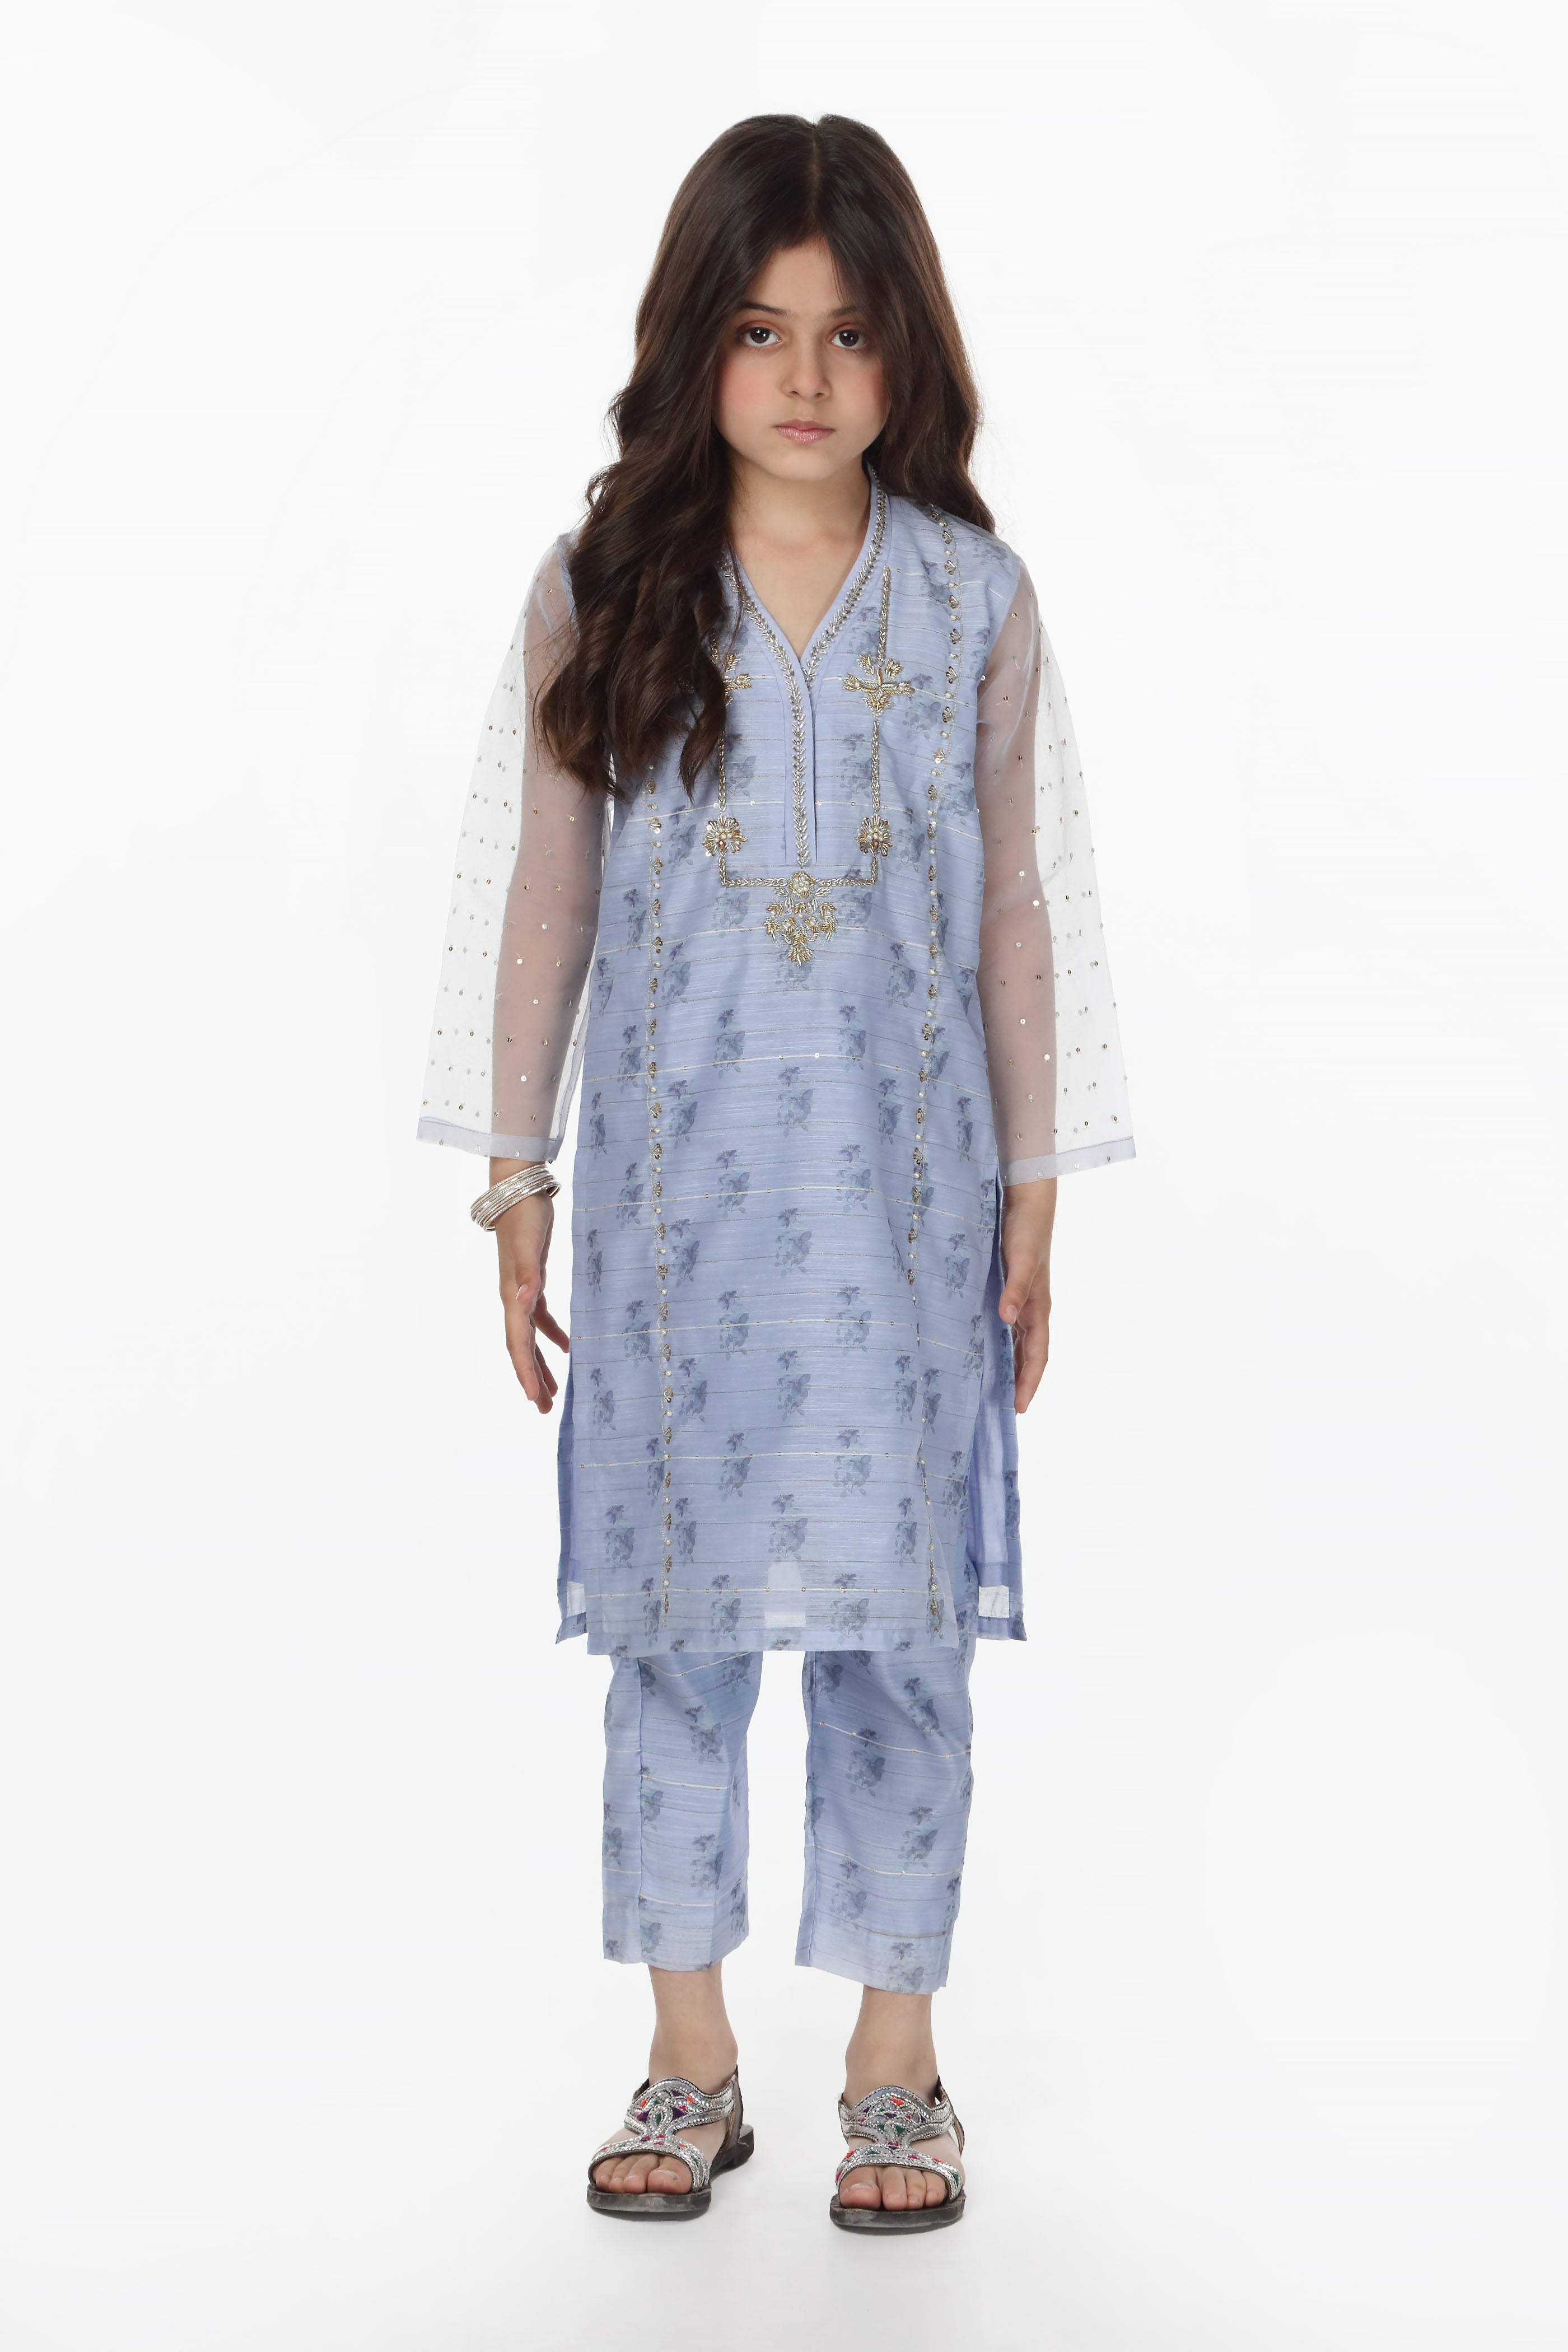 Embellished Kameez with Trousers (GPW-969)